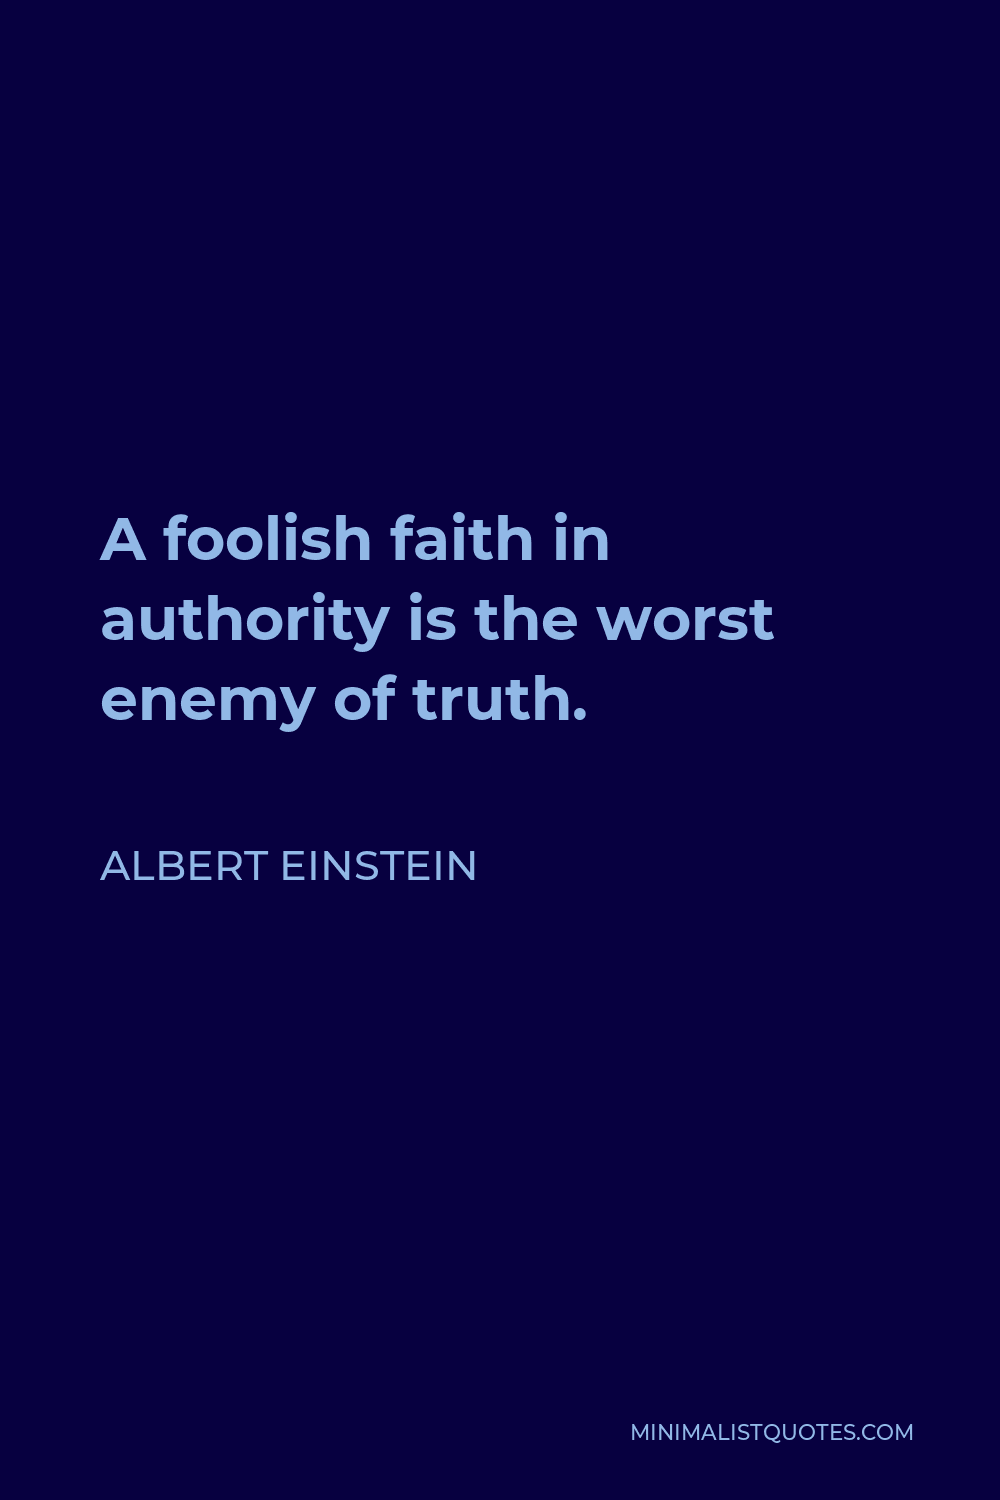 Albert Einstein Quote - A foolish faith in authority is the worst enemy of truth.